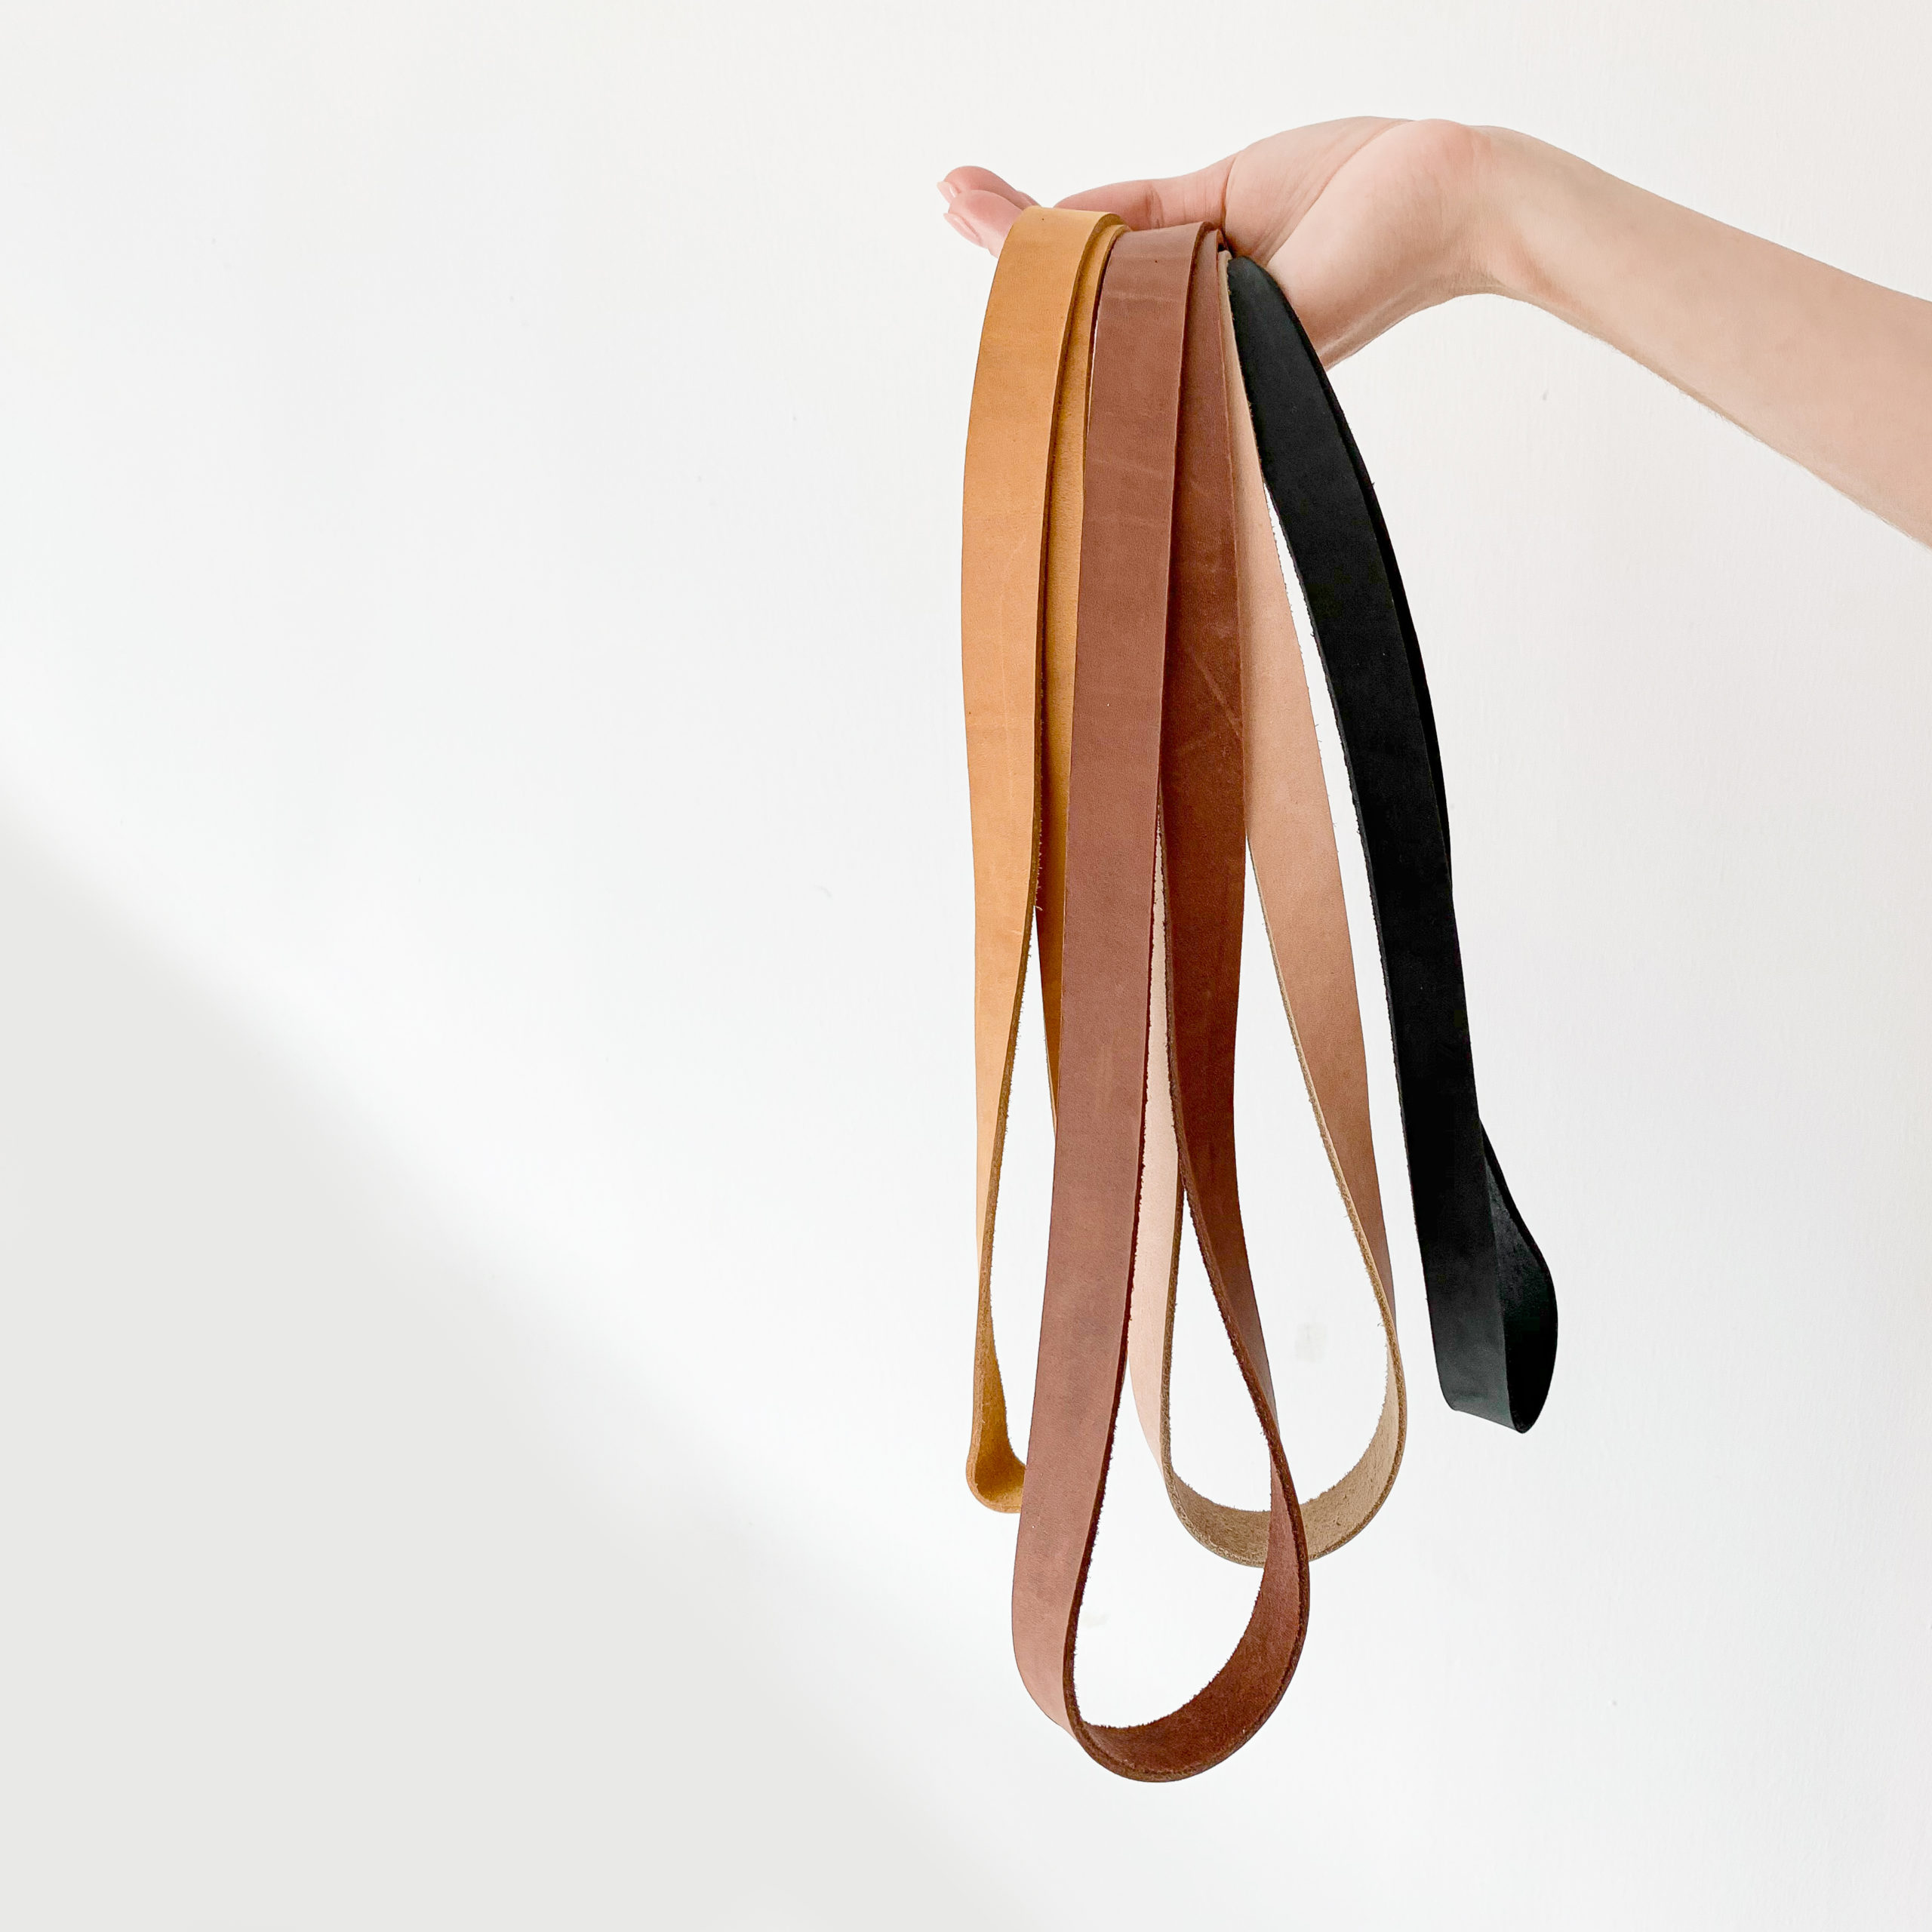 Lanyards LOC Large in the colors cognac, dark brown, light brown and charcoal.